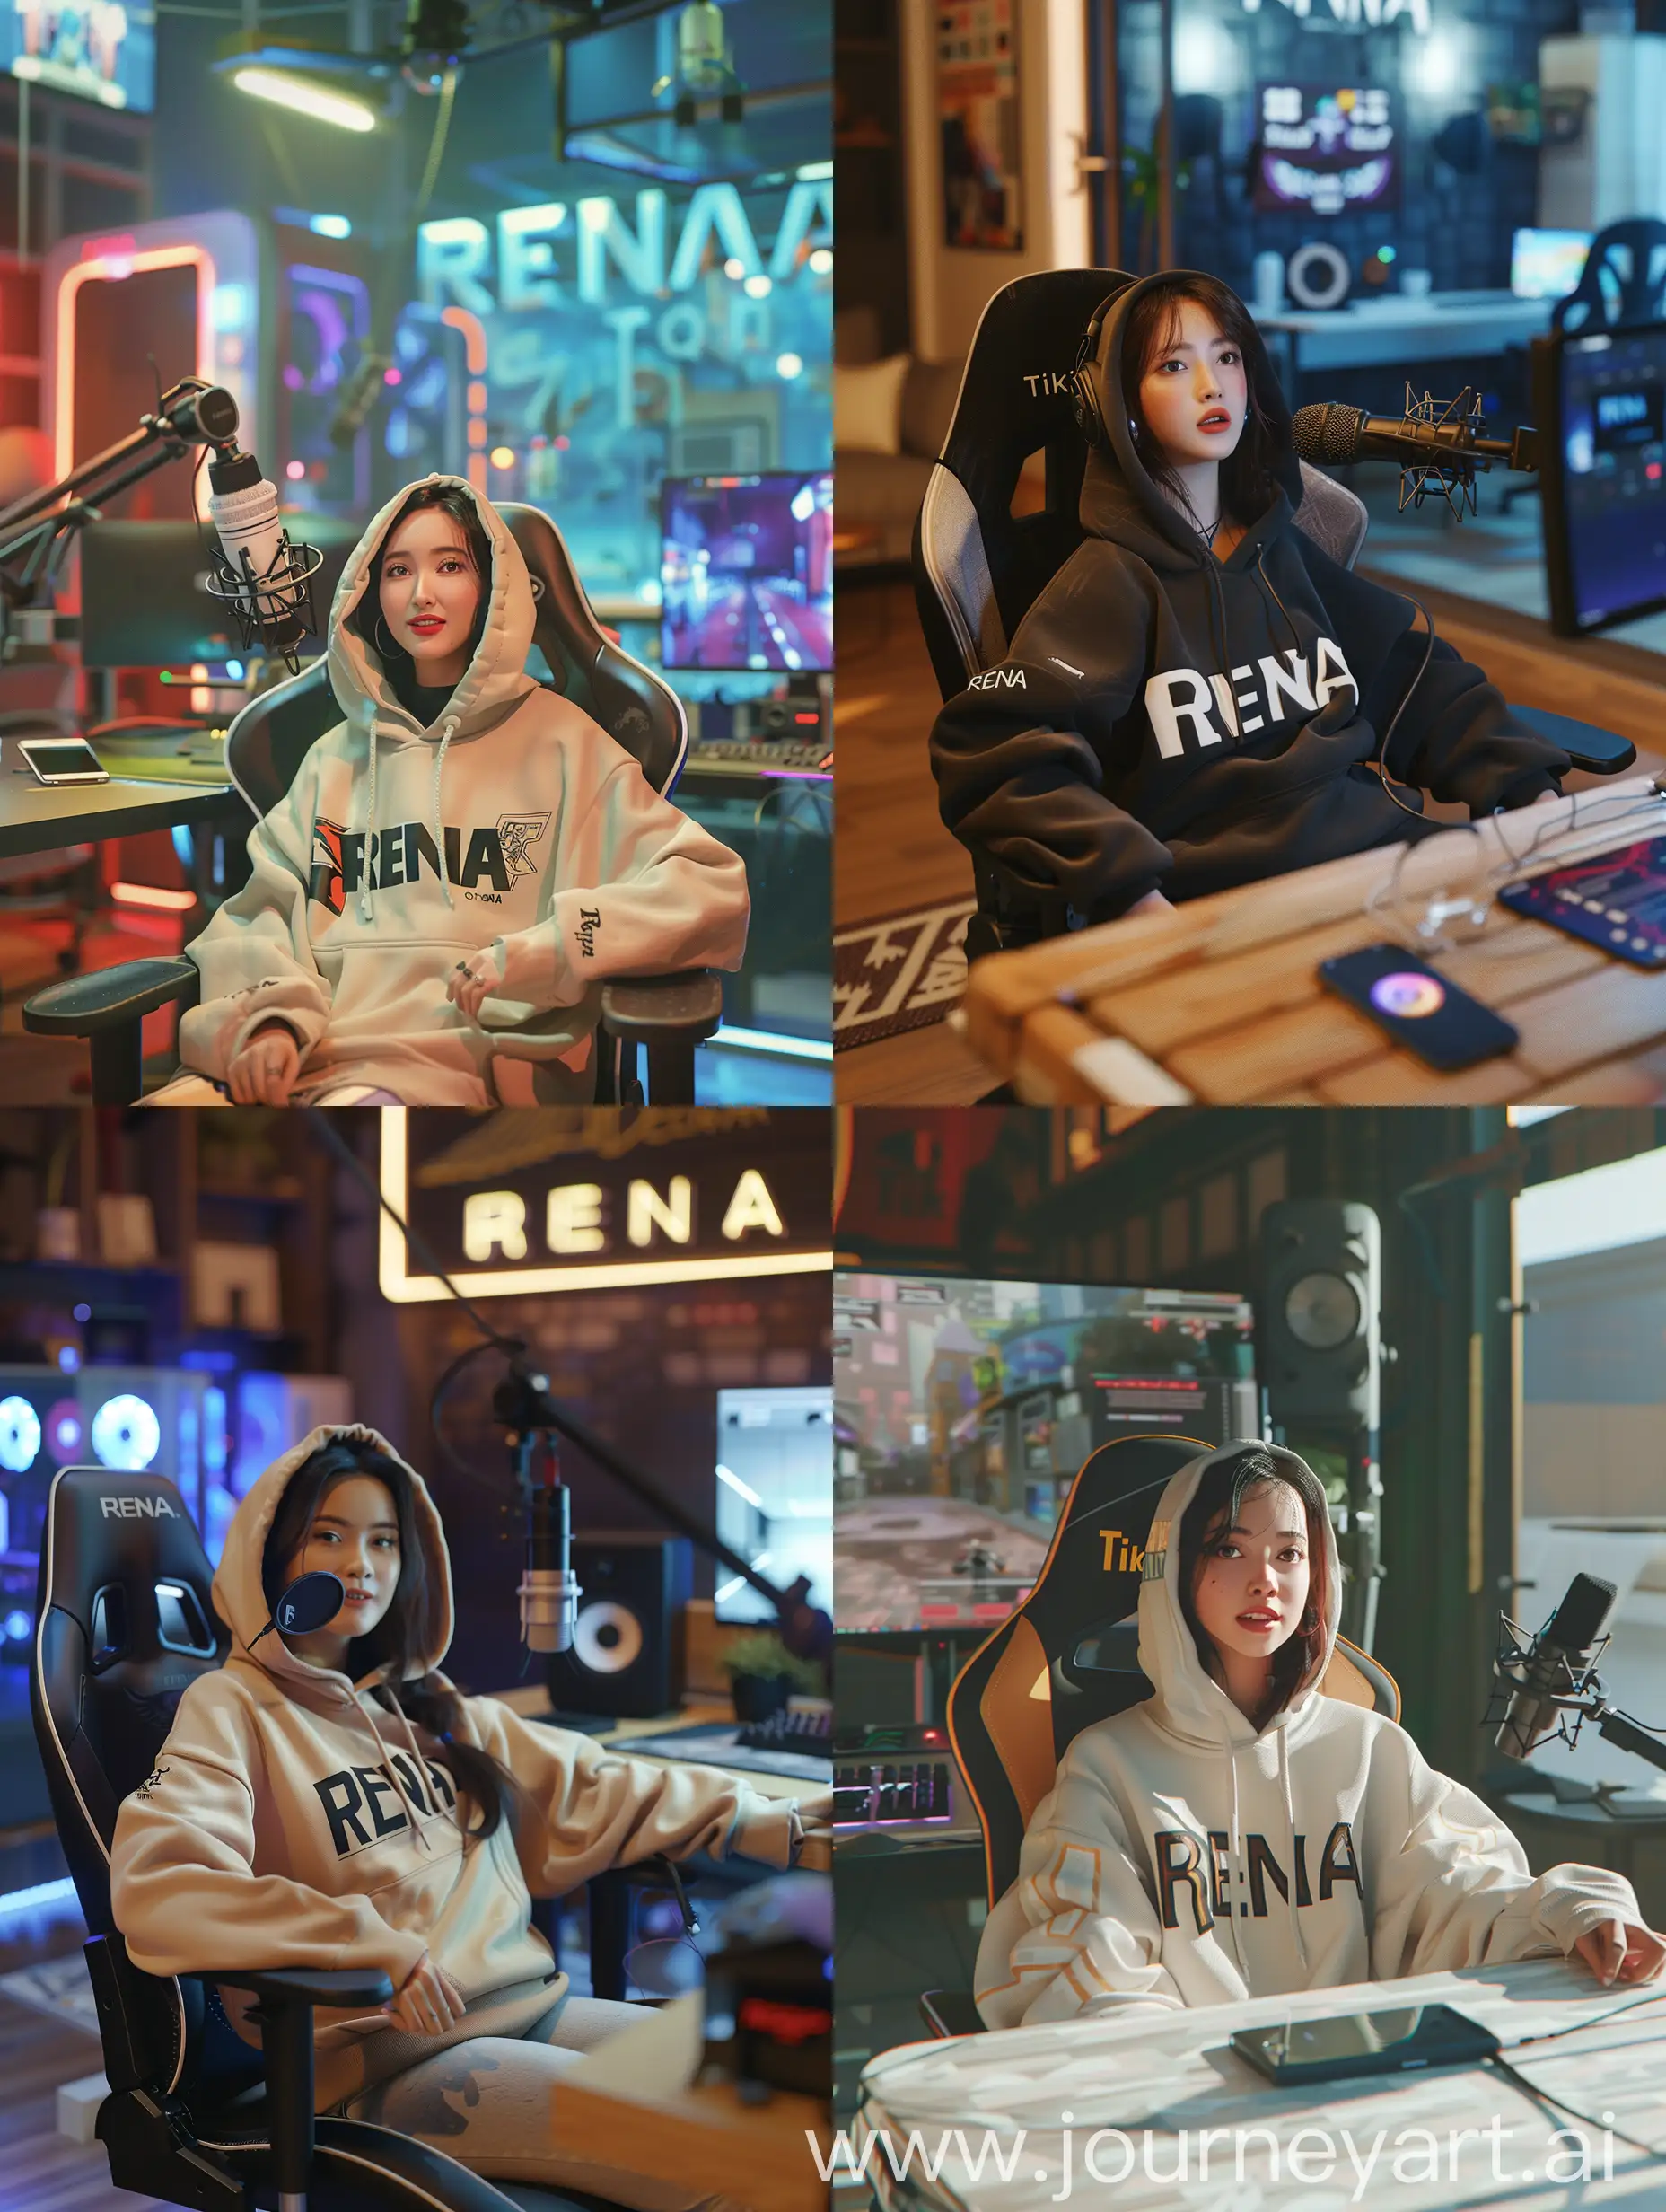 A 32-year-old Indonesian woman is making a podcast on the TikTok application, sitting in a gaming chair wearing a 'RENA' hoodie. In front of him is a microphone and an Apple phone on a table, with a realistic HD background of a room with the words 'RENA' written on it.